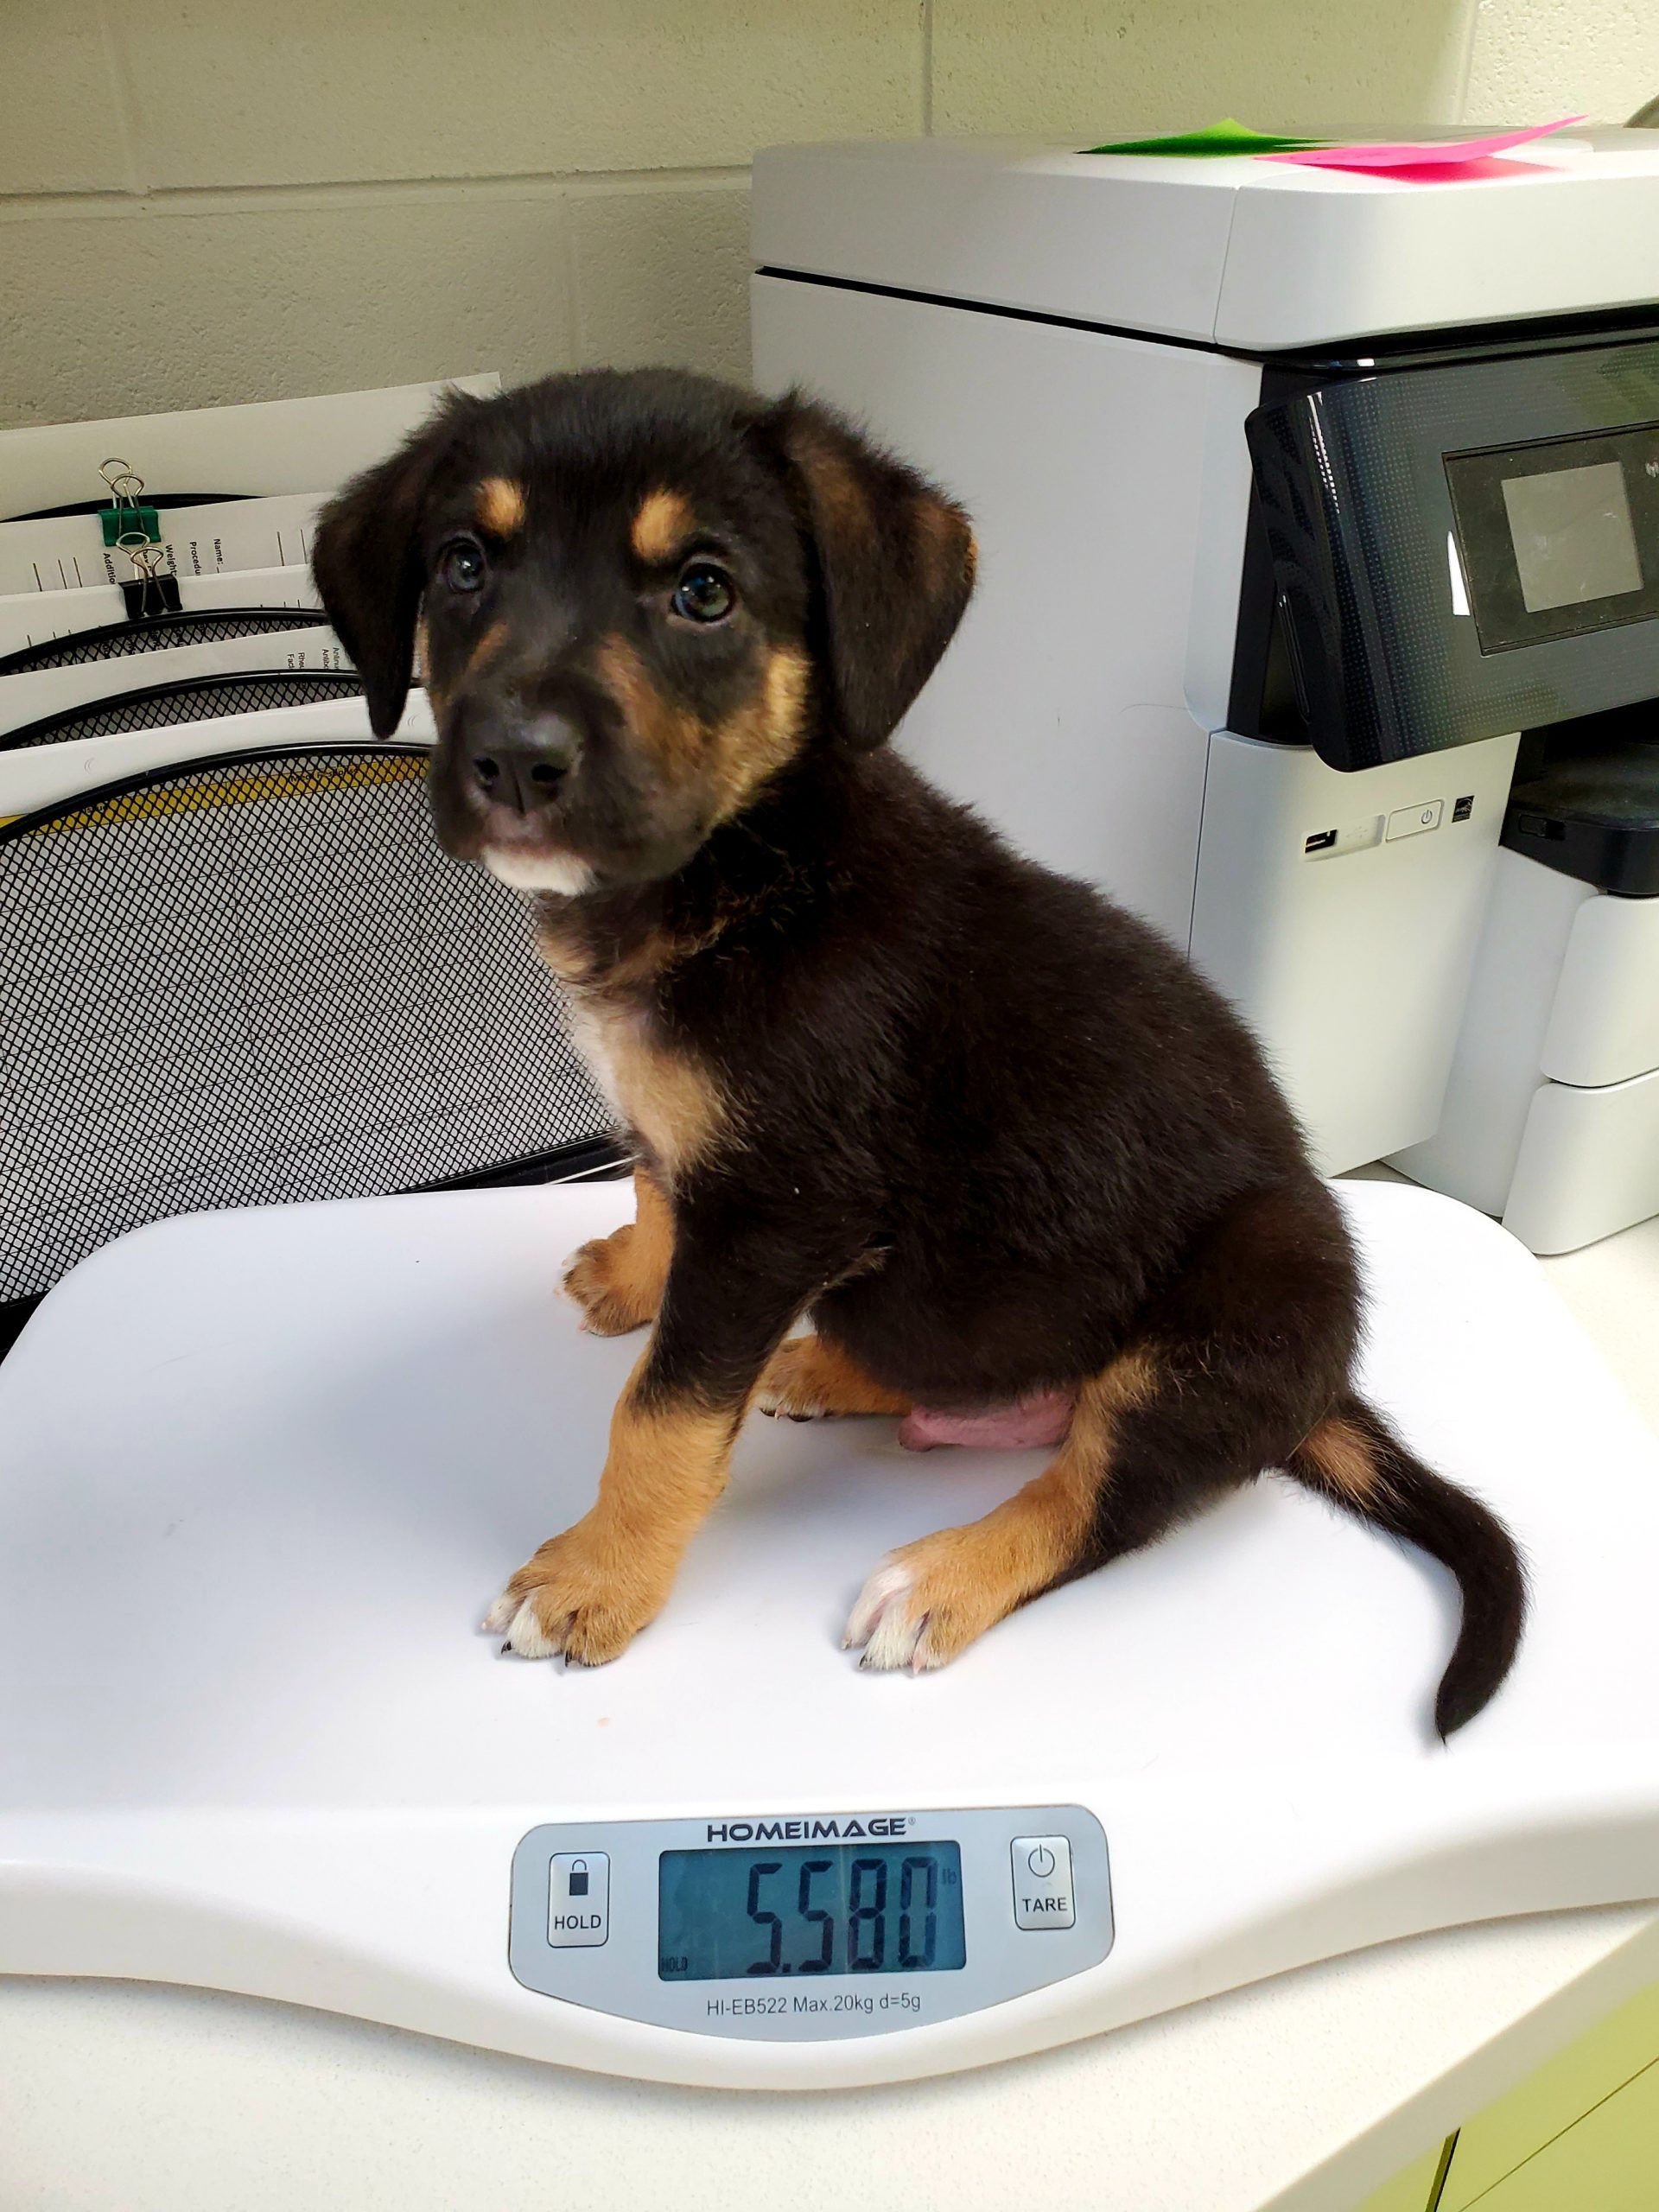 Weekly Weigh-In